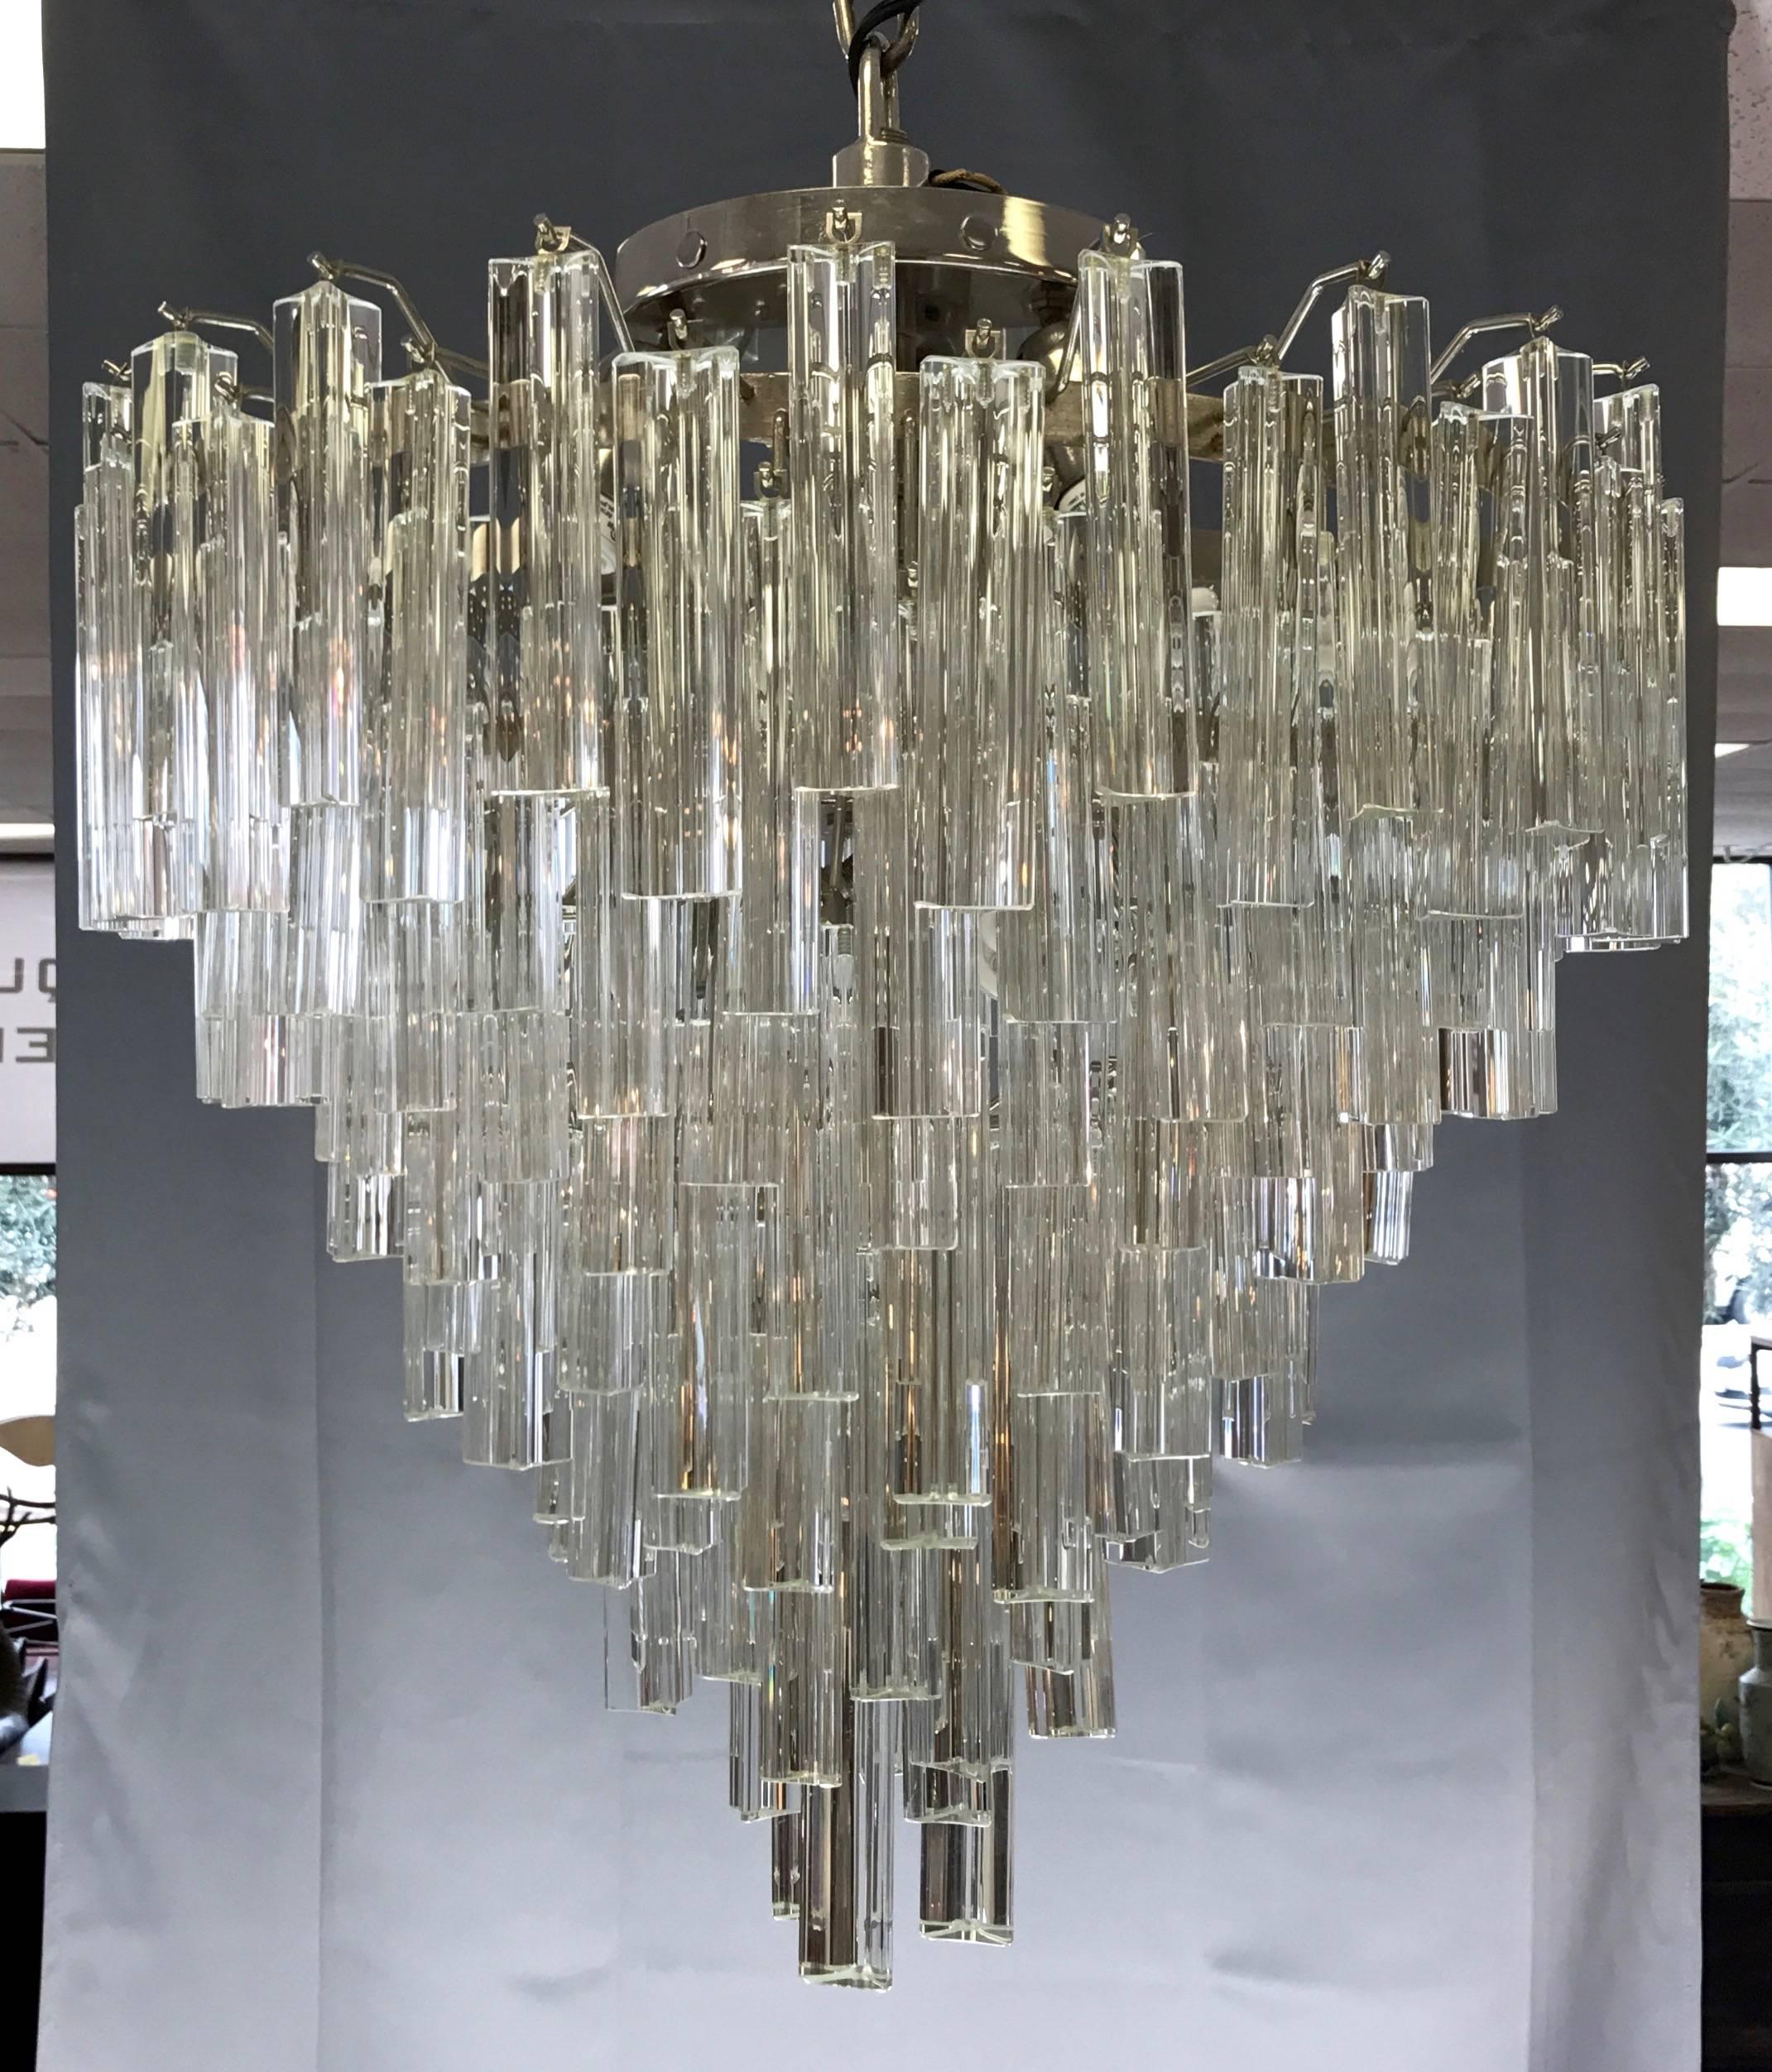 A large and spectacular “Prismi” Murano glass seven-tier chandelier by Venini.

Dazzling cascade of hundreds of 6”-long solid glass trihedral prisms hang from staggered metal spokes that emanate from a polished nickel cage with seven stepped tiers.